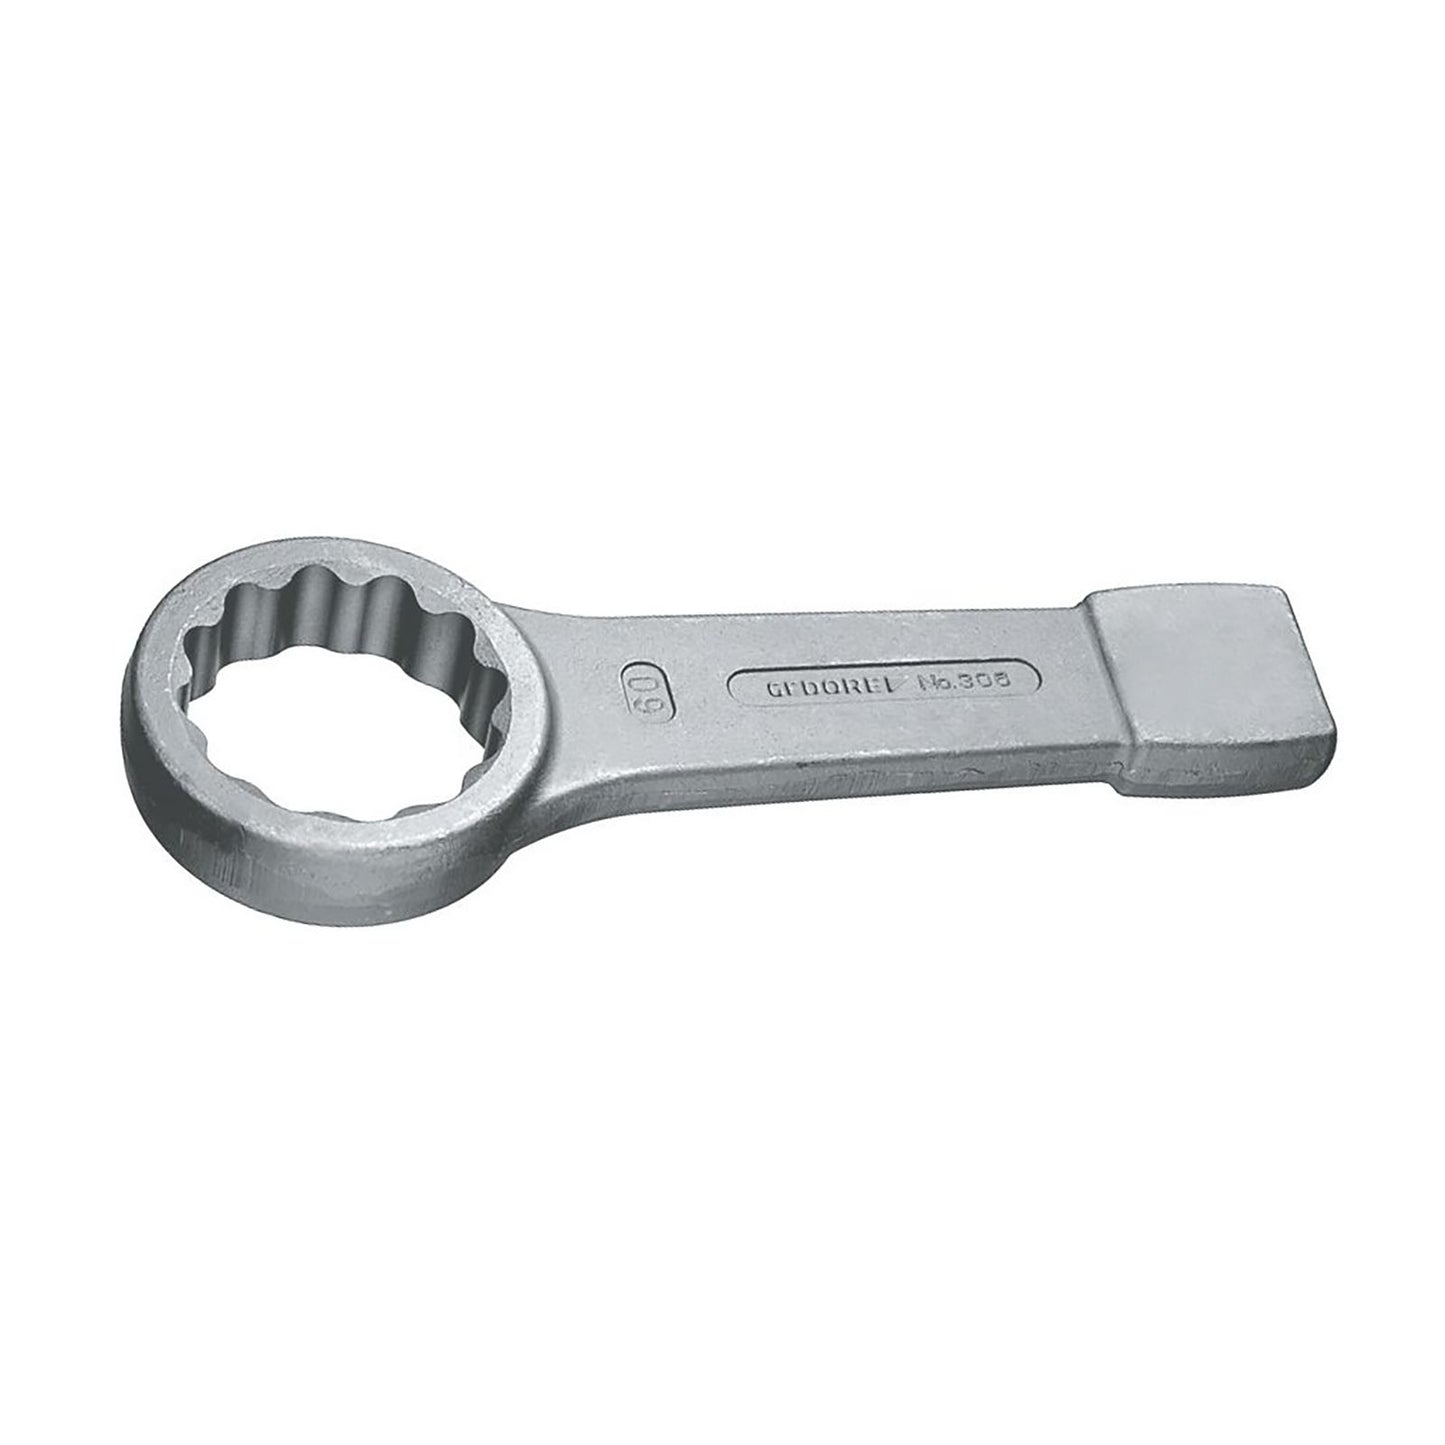 GEDORE 306 41 - Closed Strike Wrench, 41mm (6475510)